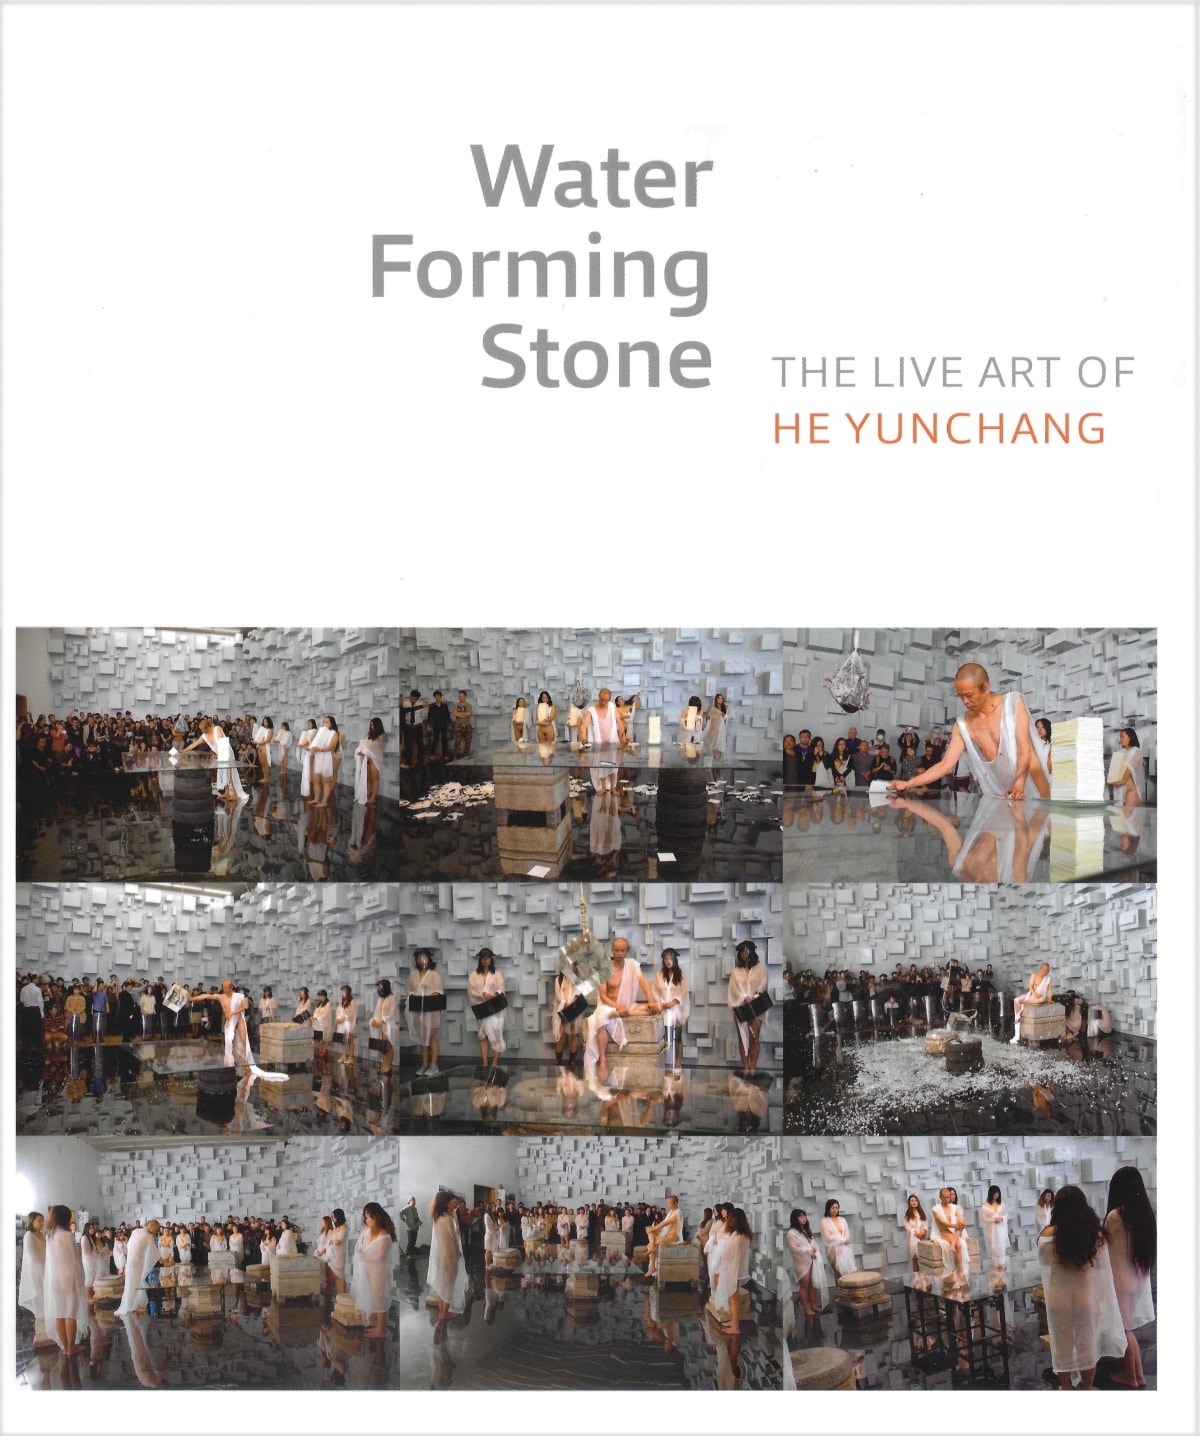 Water Forming Stone: The Live Art of He Yunchang